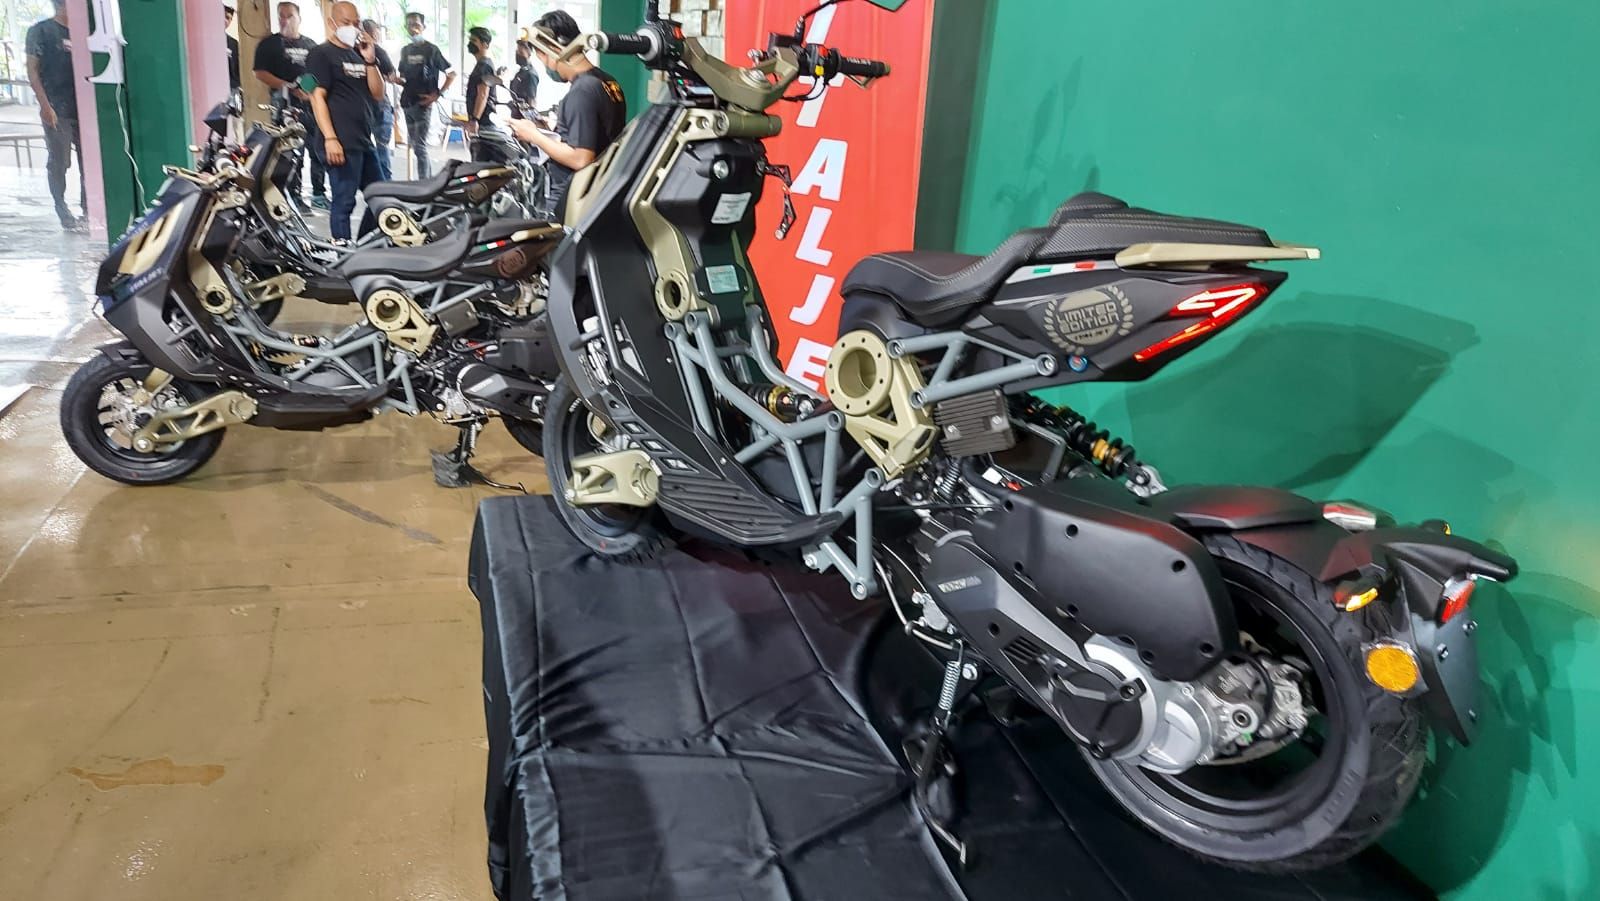 Italjet Dragster Limited Edition meluncur di Indonesia